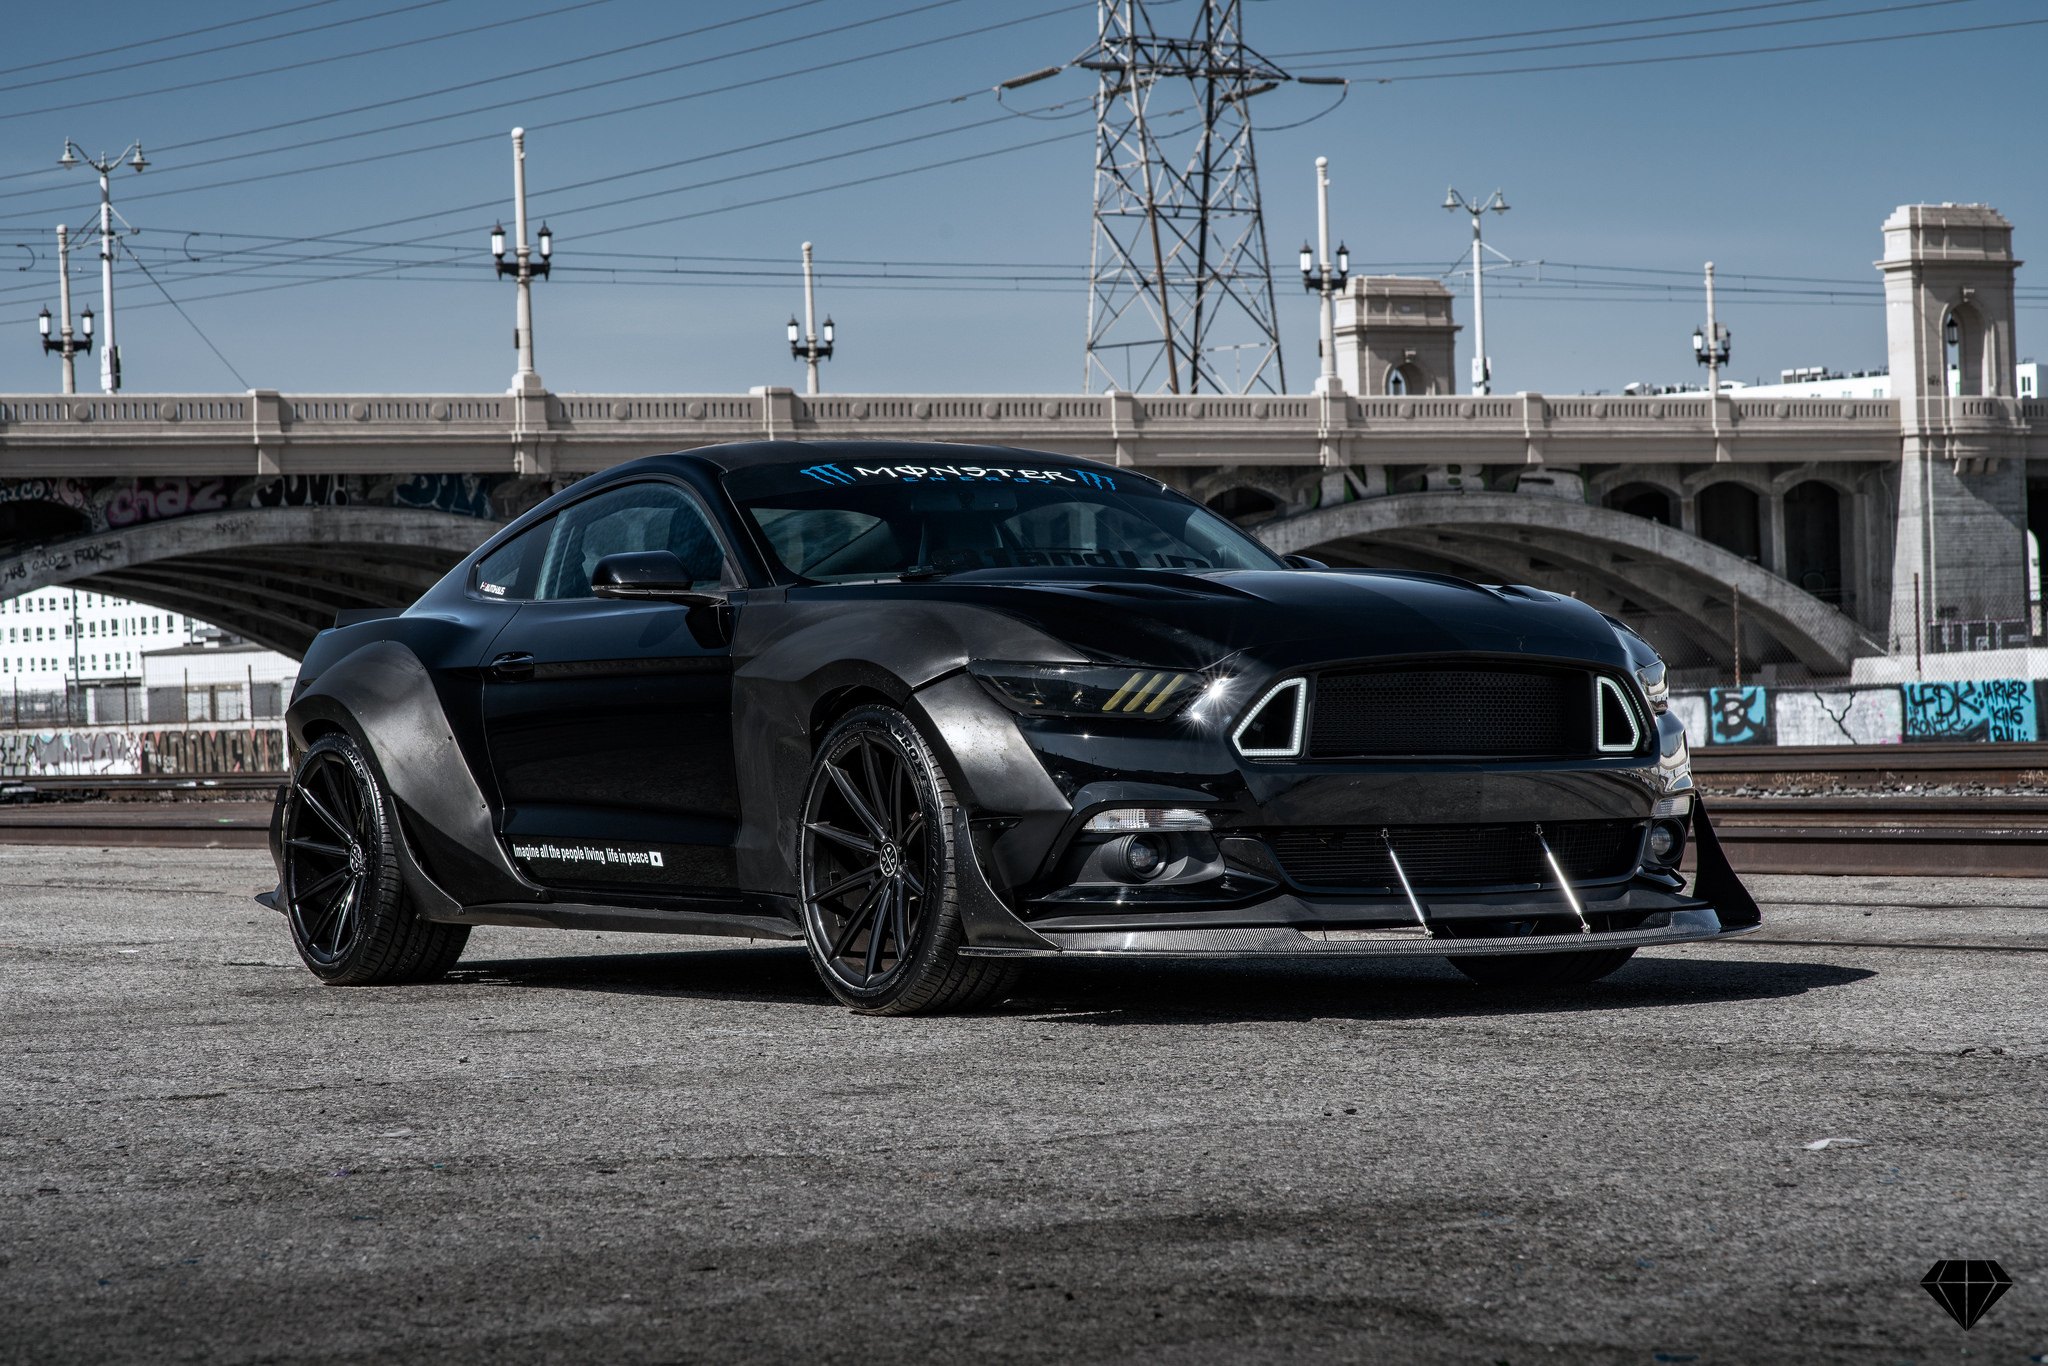 Carbon Fiber Front Lip on Black Ford Mustang - Photo by Blaque Diamond Wheels